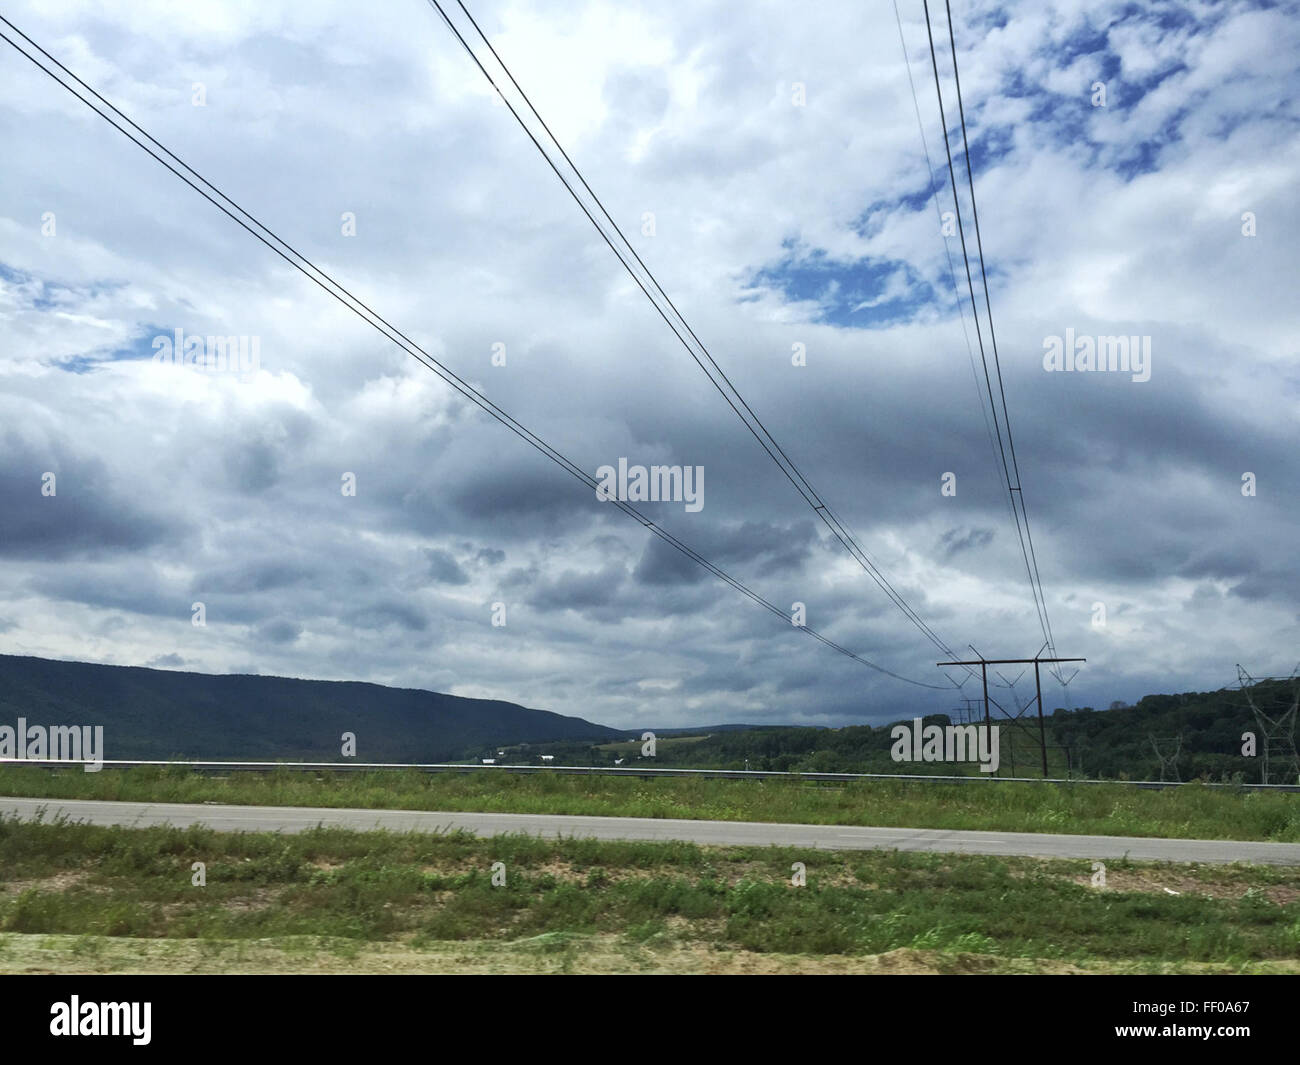 Overhead Power Lines on Country Landscape Overhead Power Lines on Country Landscape Stock Photo